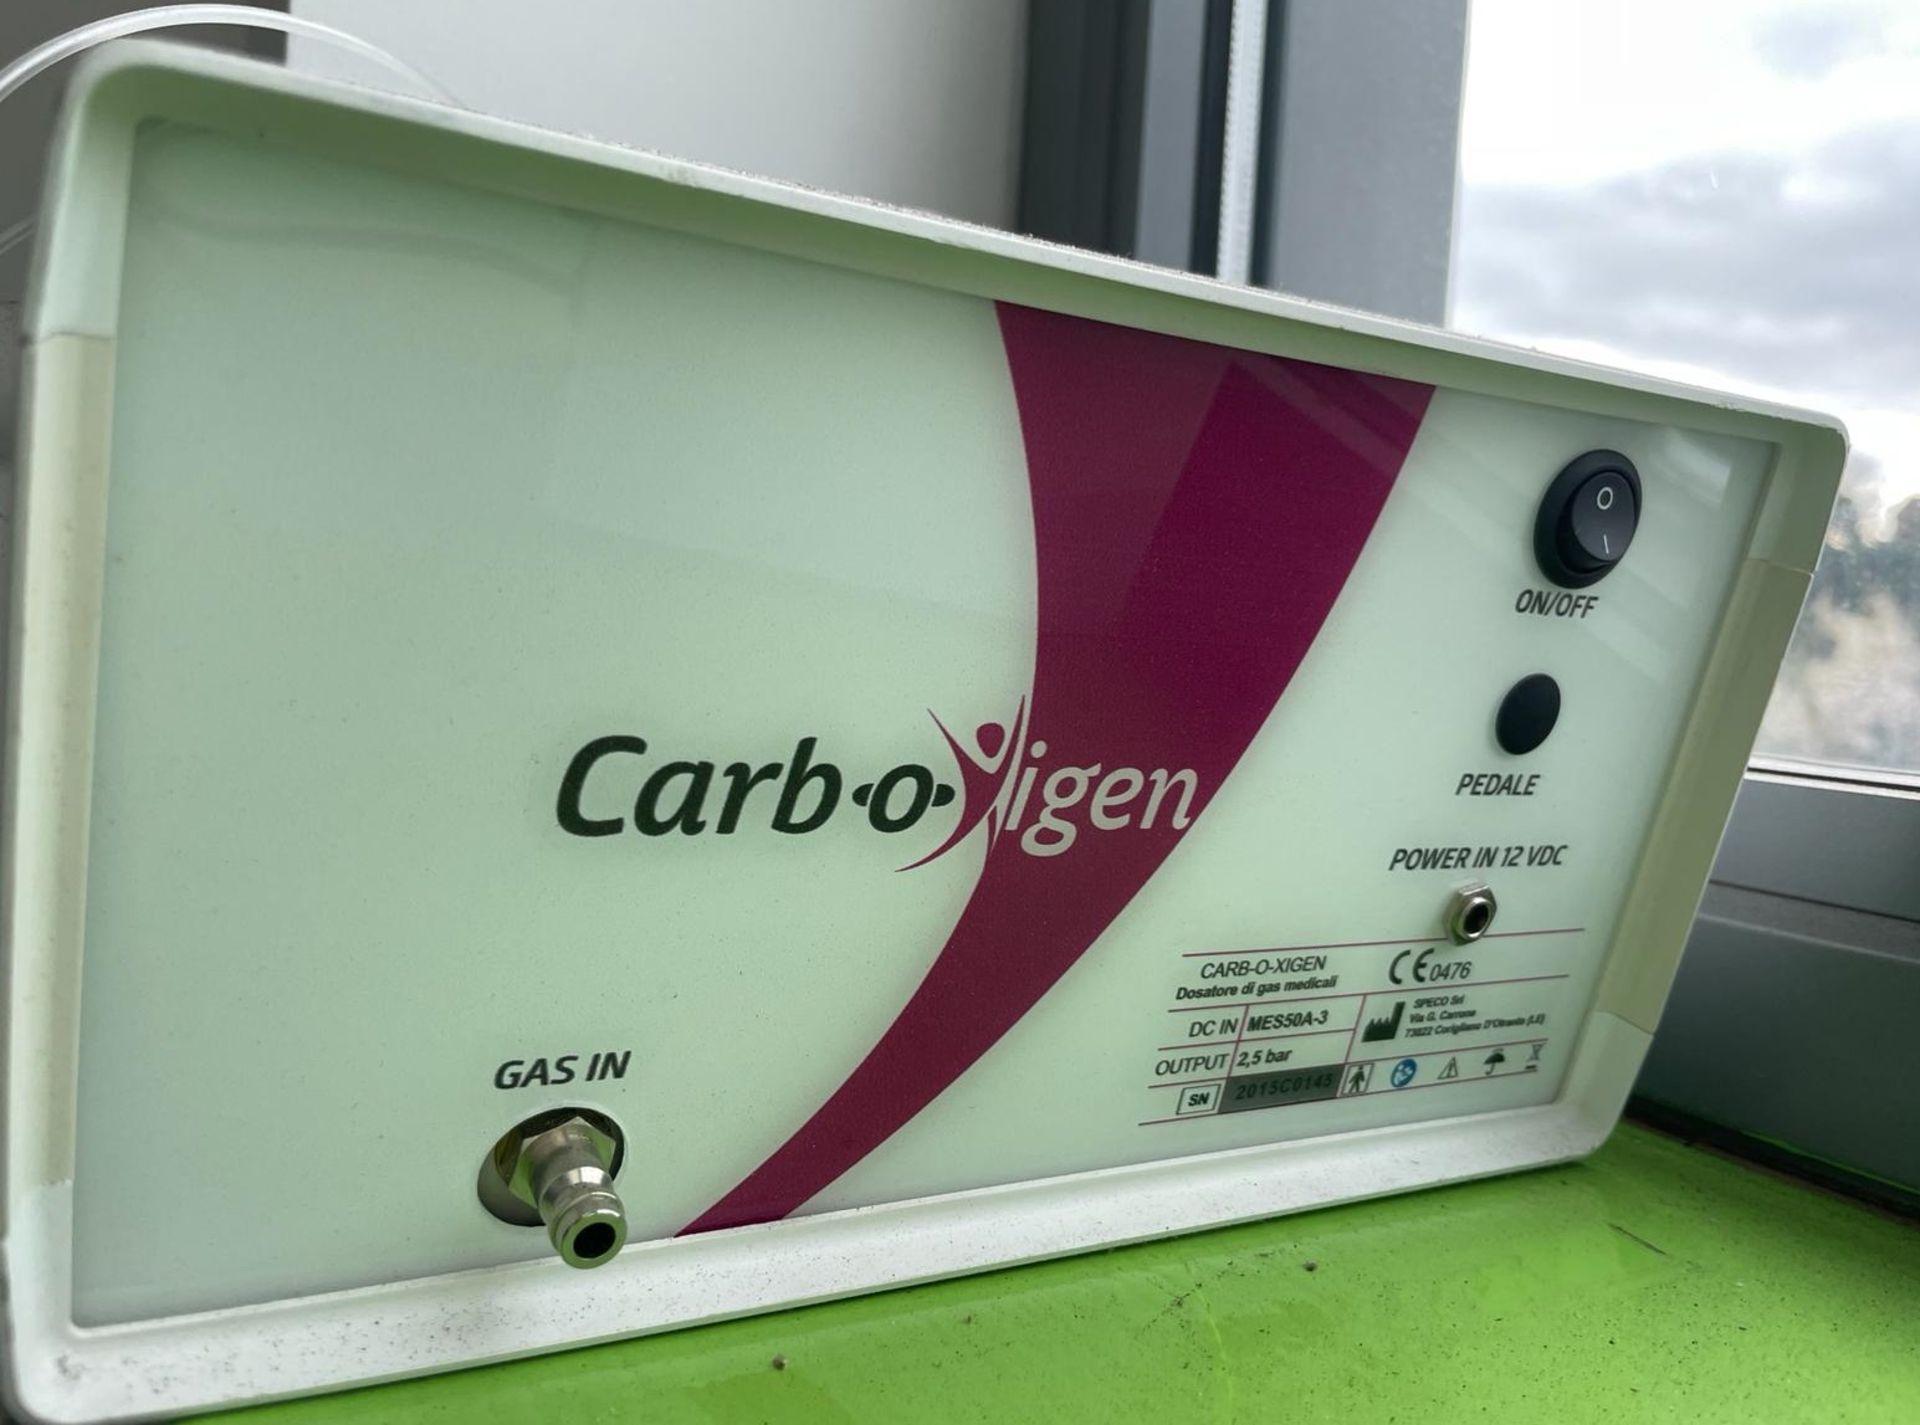 1 x Carb-O-Xygen Table Carboxytherapy Medical Gas Dispenser - For The Sterile and Personalized - Image 2 of 6